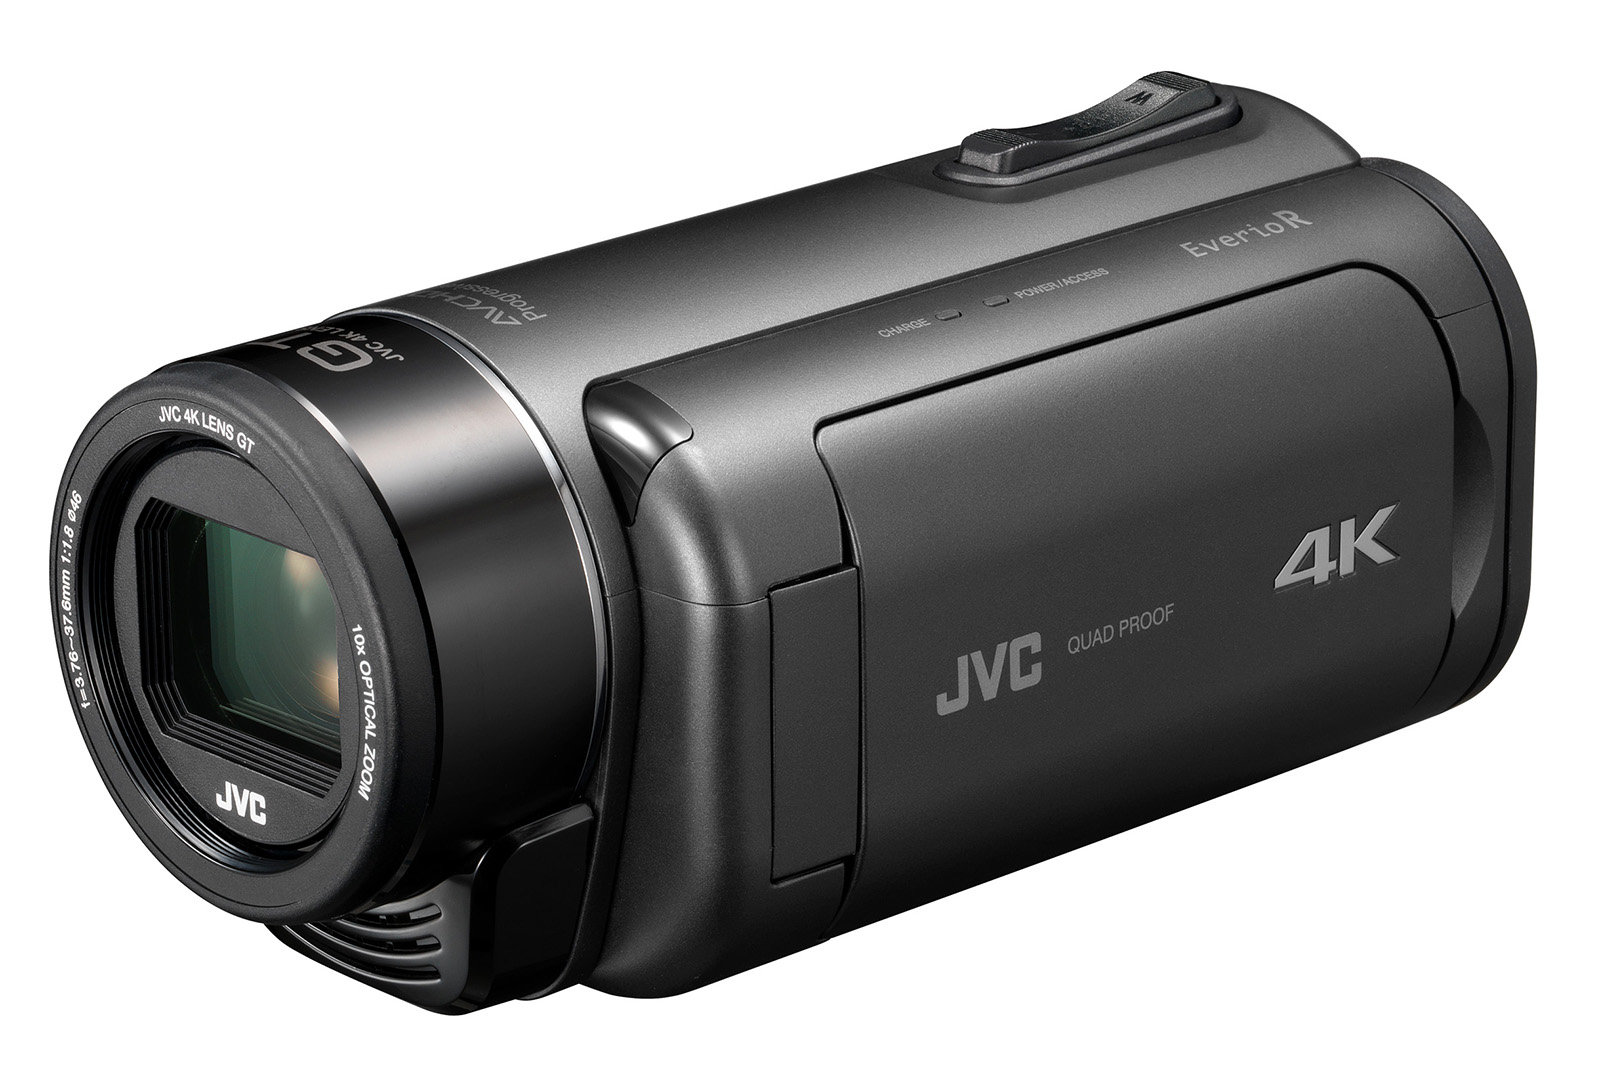 JVC Designed Waterproof Camcorders for Action Camera Durability